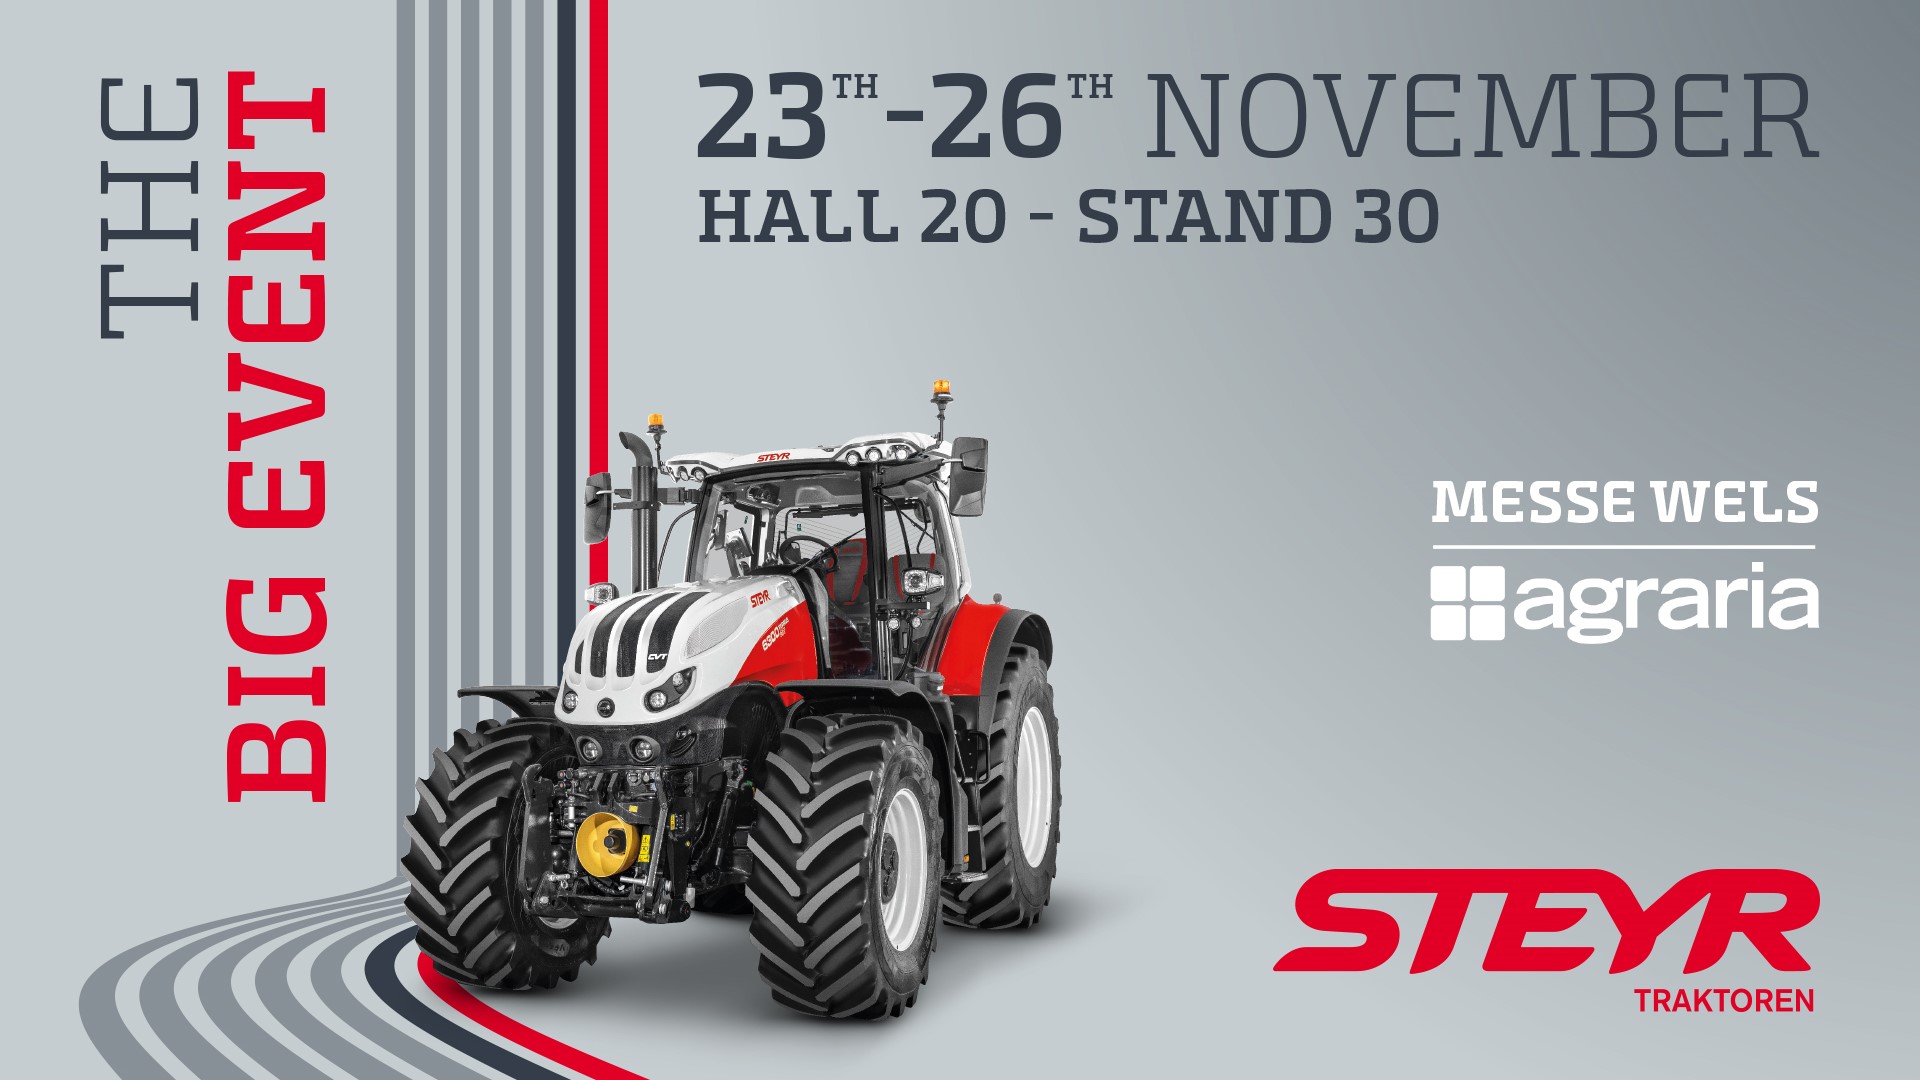 STEYR® SET TO SHOW LATEST TRACTOR AND TECHNOLOGY DEVELOPMENTS AT